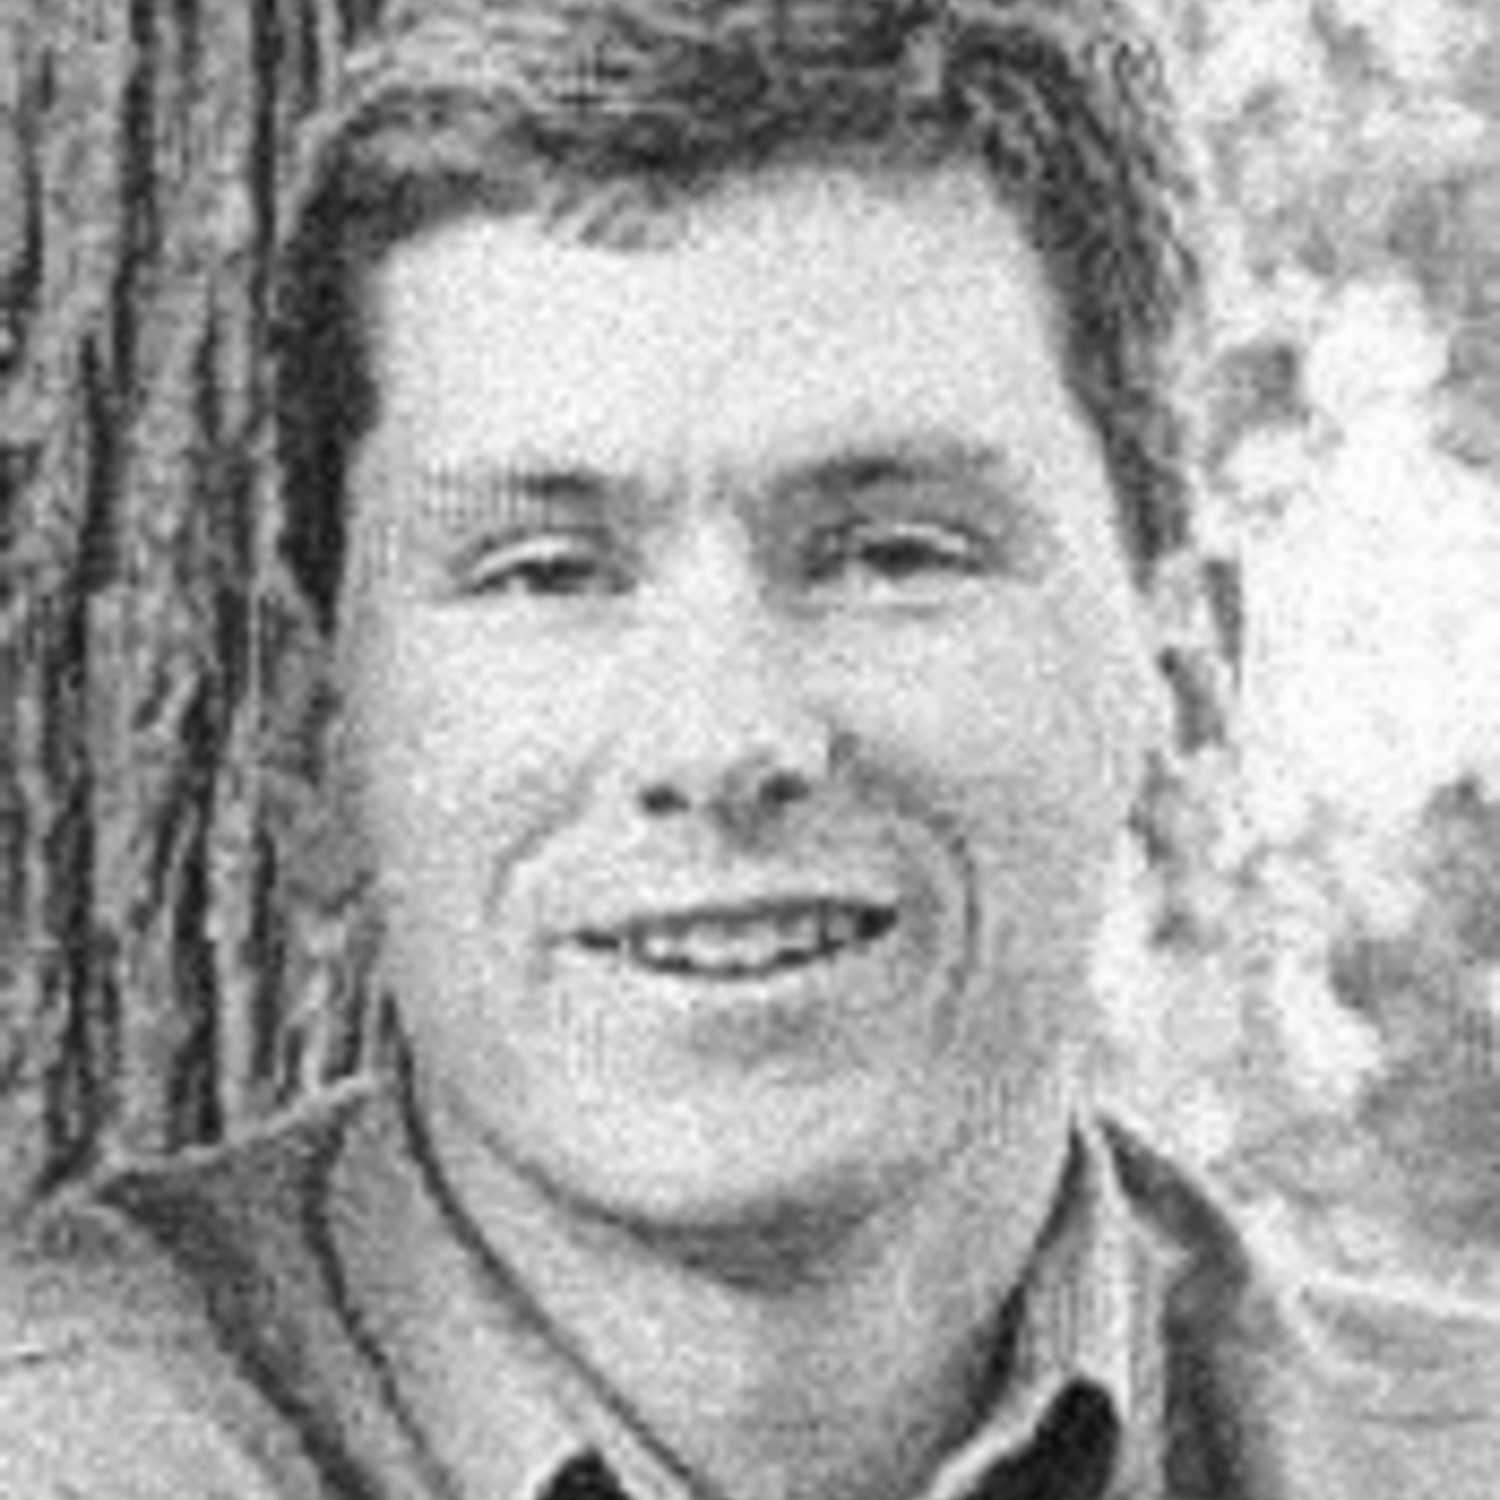 A black and white headshot of Johnny Span, smiling at the camera, in front of a tree.